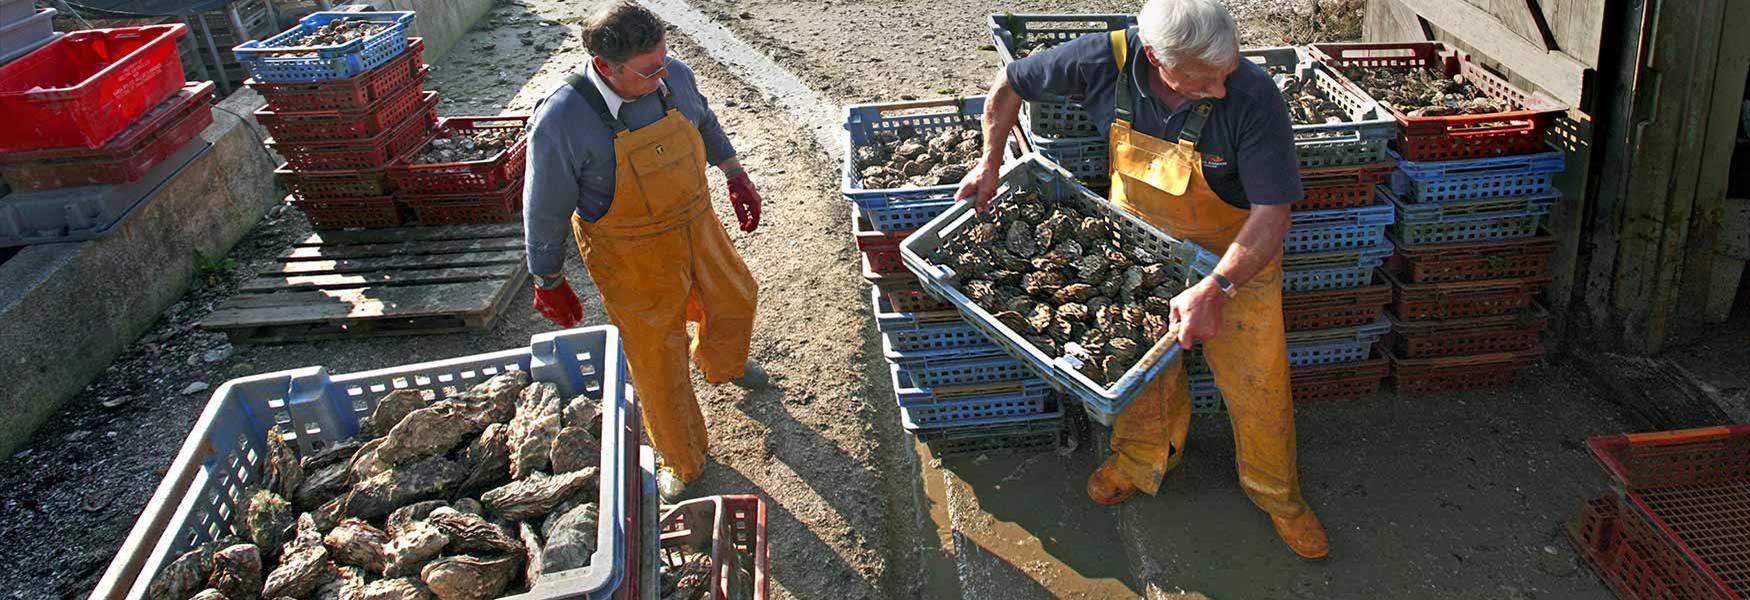 A Fresh Catch of Oysters on Mersea Island